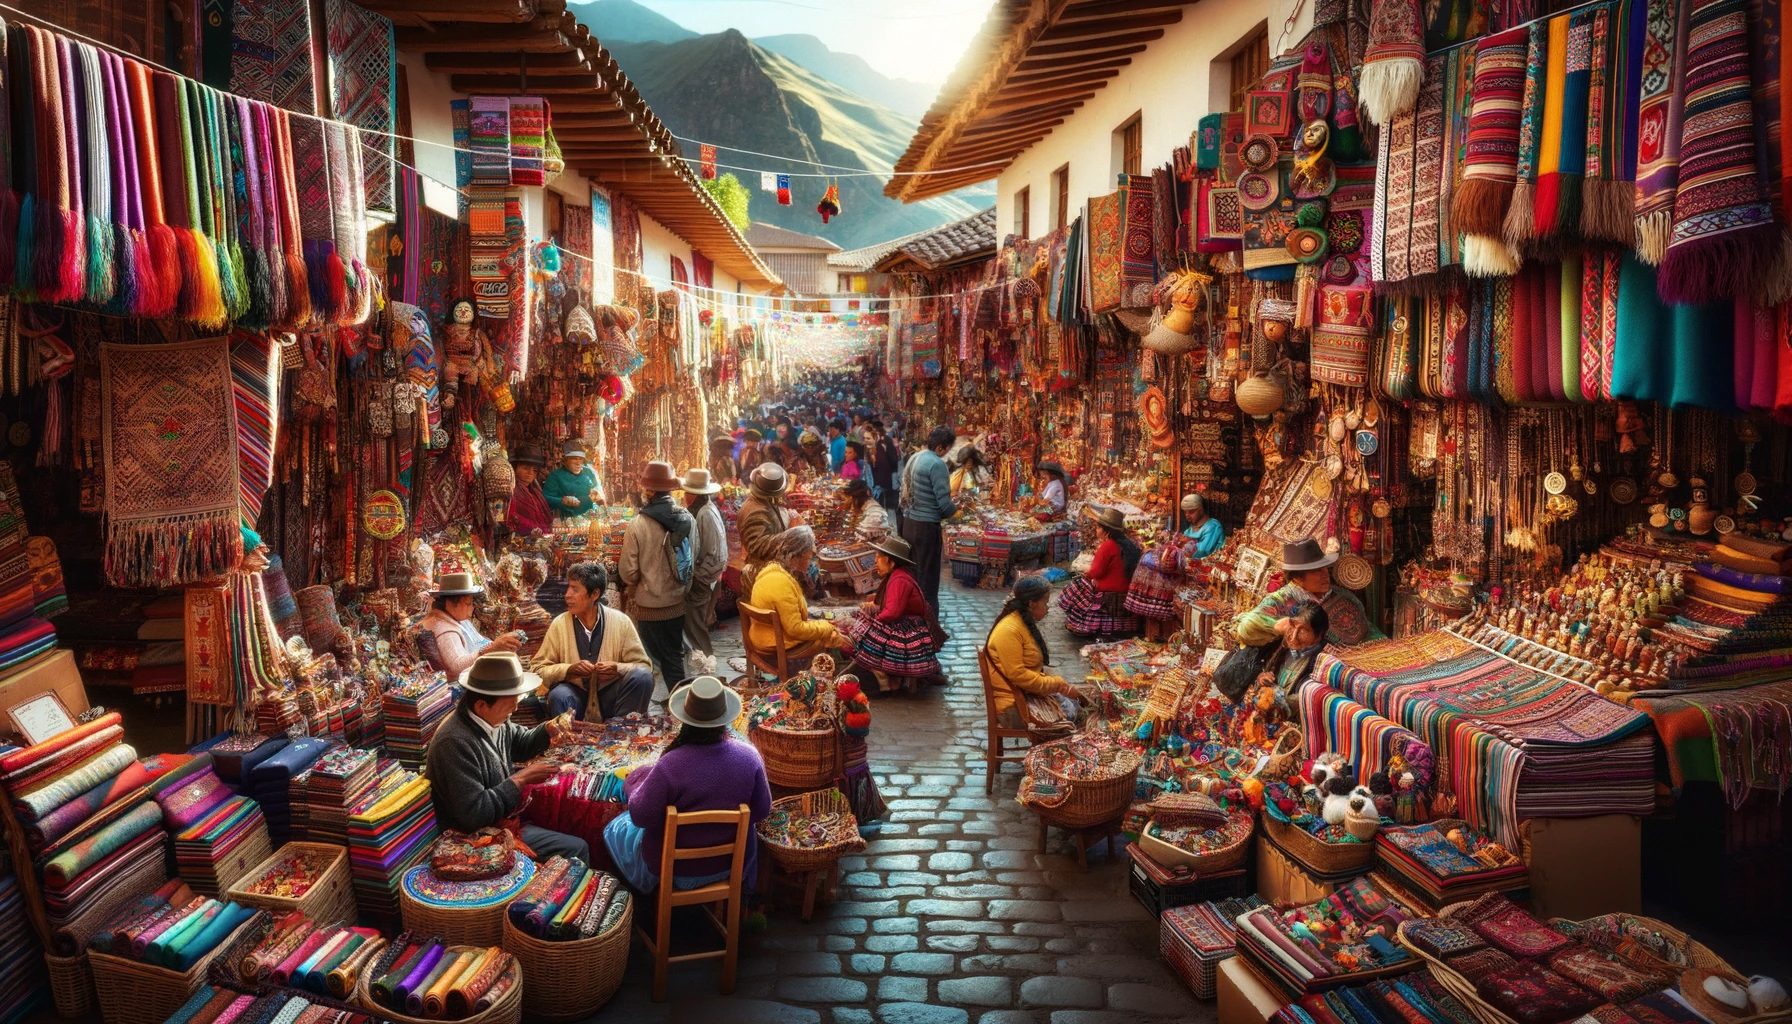 Vibrant traditional market in Andean town.